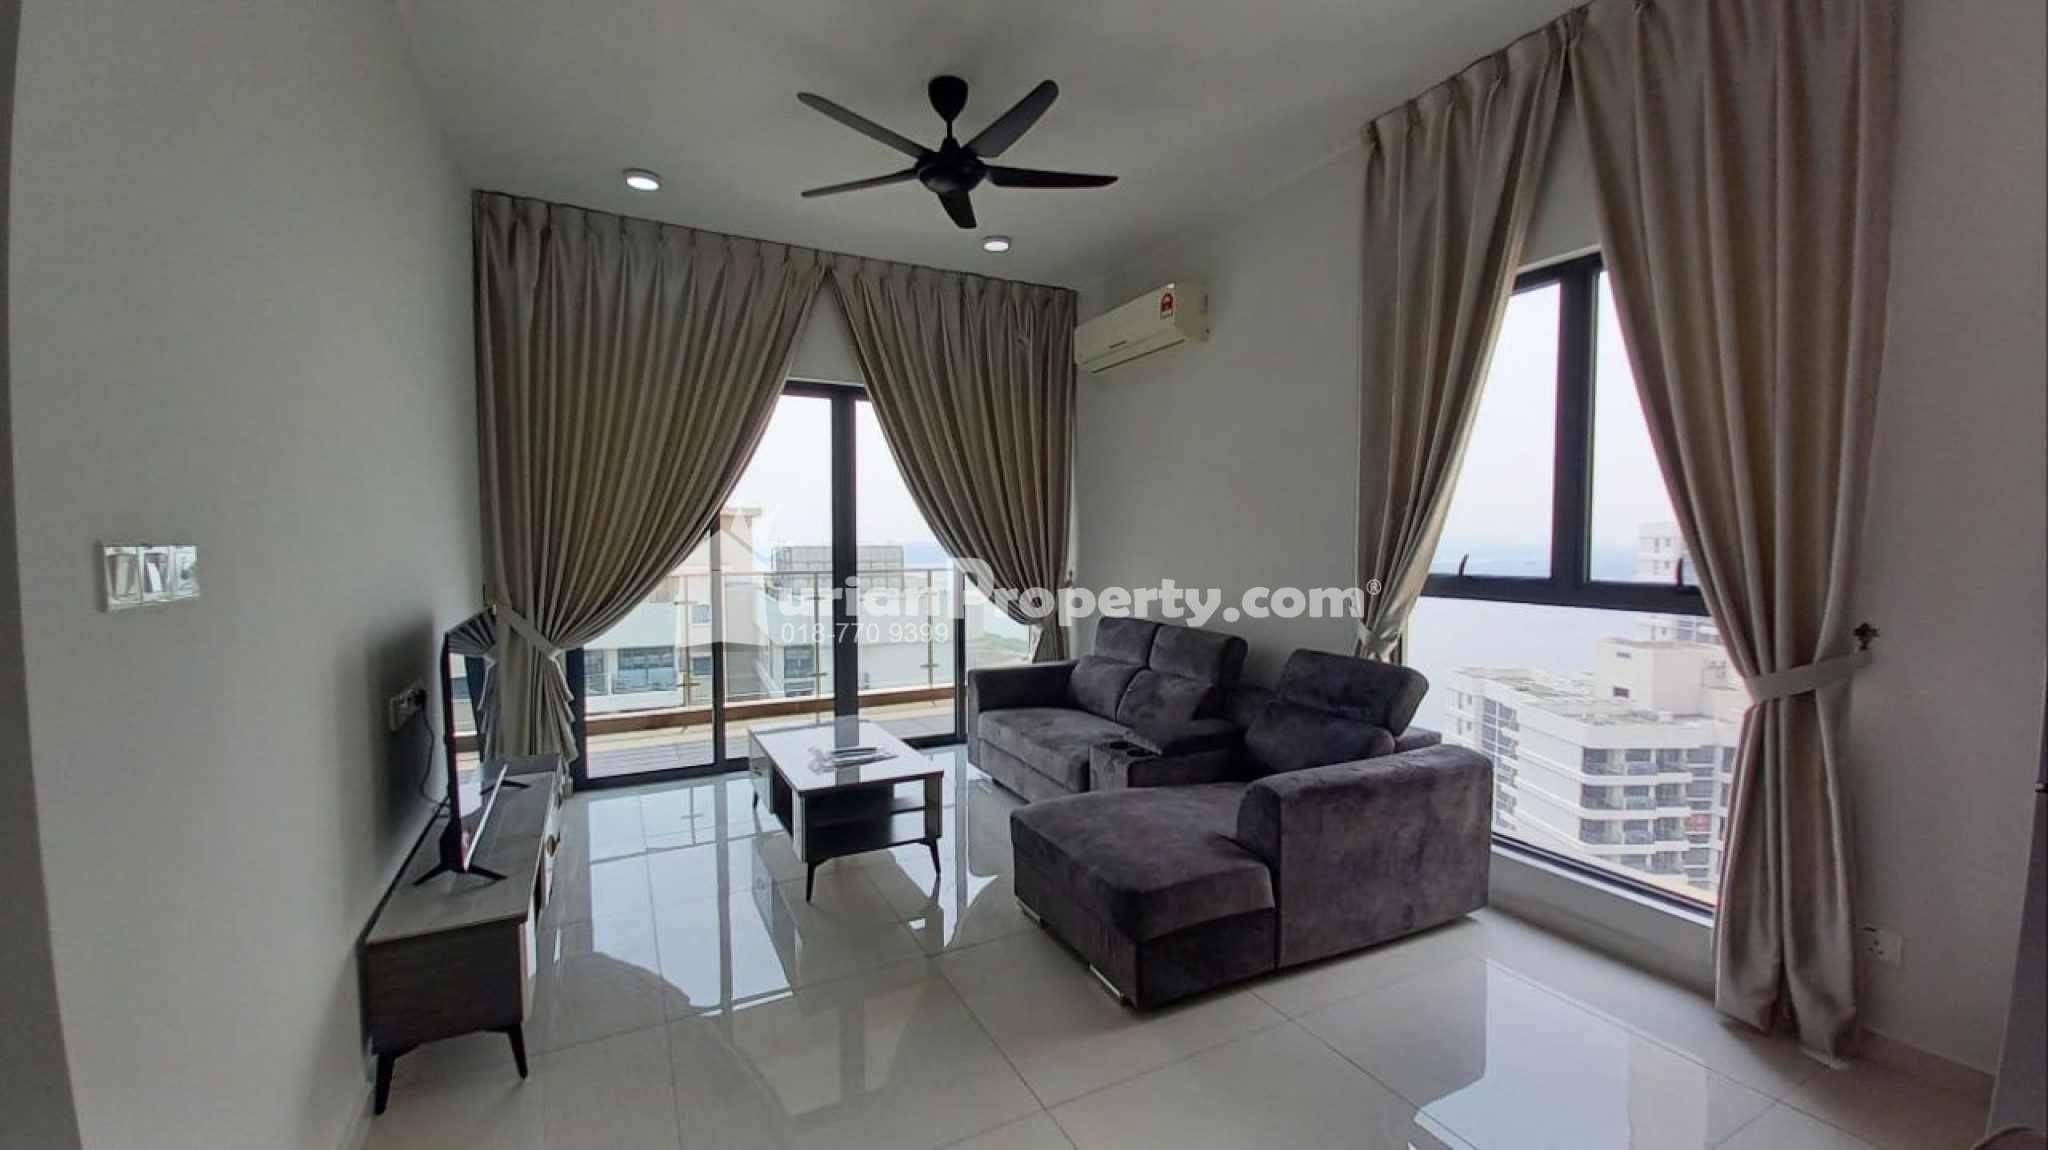 Apartment For Rent at Country Garden Danga Bay